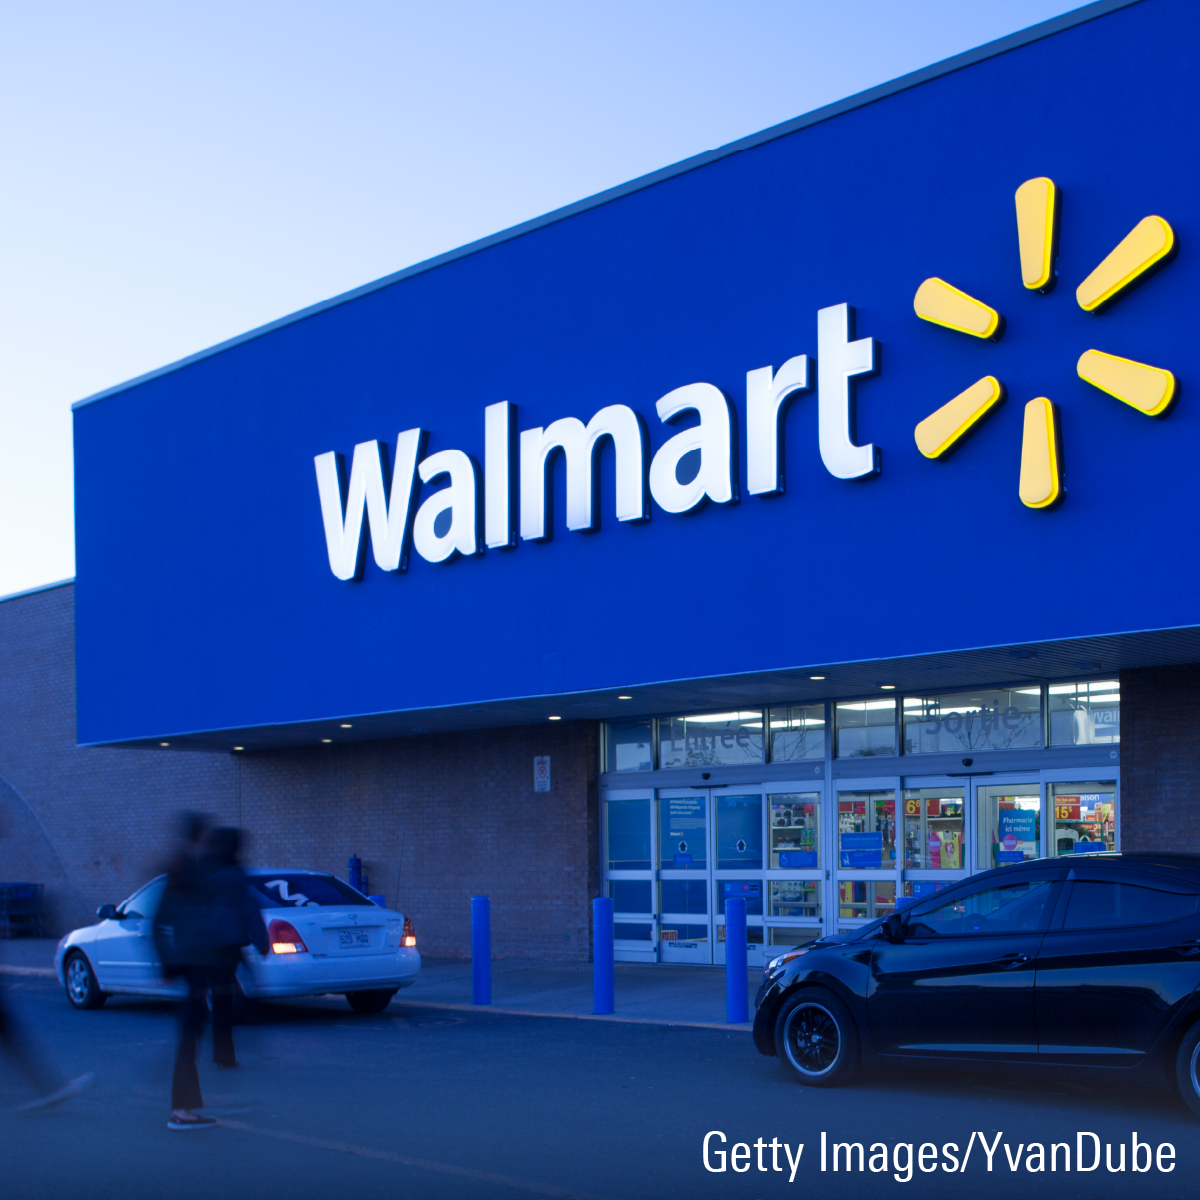 Walmart: Low Prices Winning Over Customers, Who Are Spending More